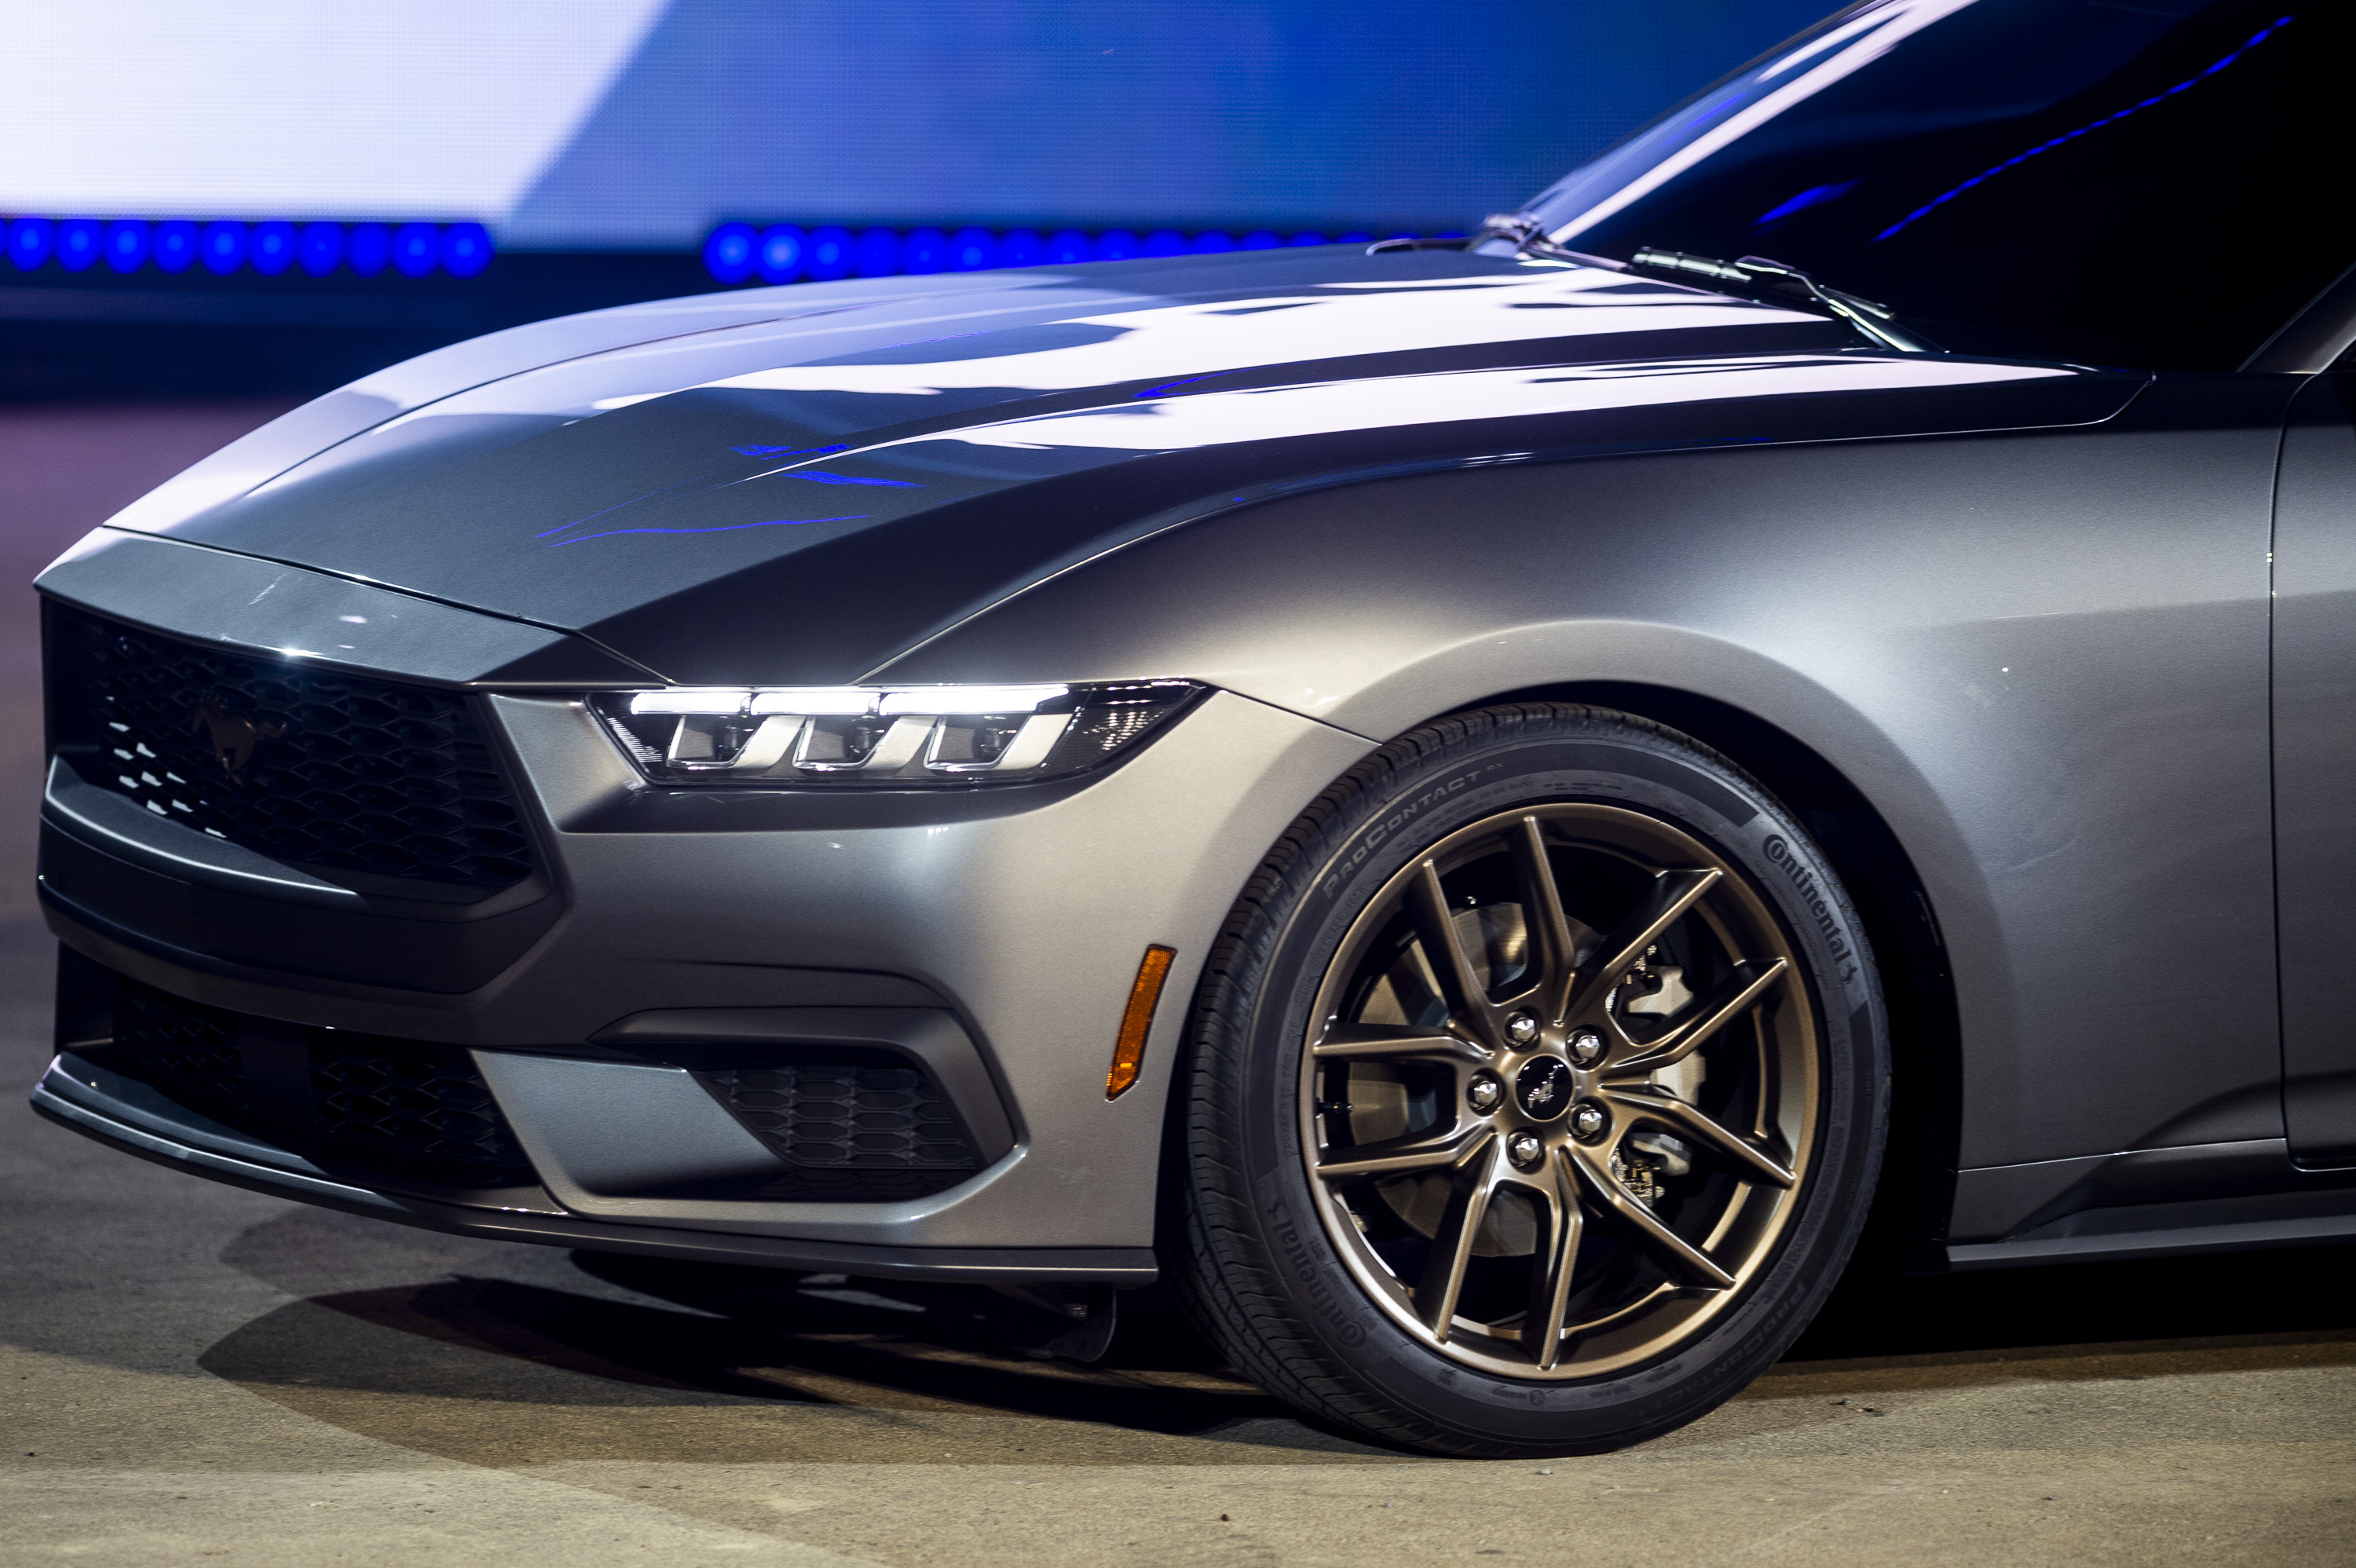 The 2024 Ford Mustang is unveiled at Hart Plaza in Detroit on Wednesday, Sept. 14 2022.